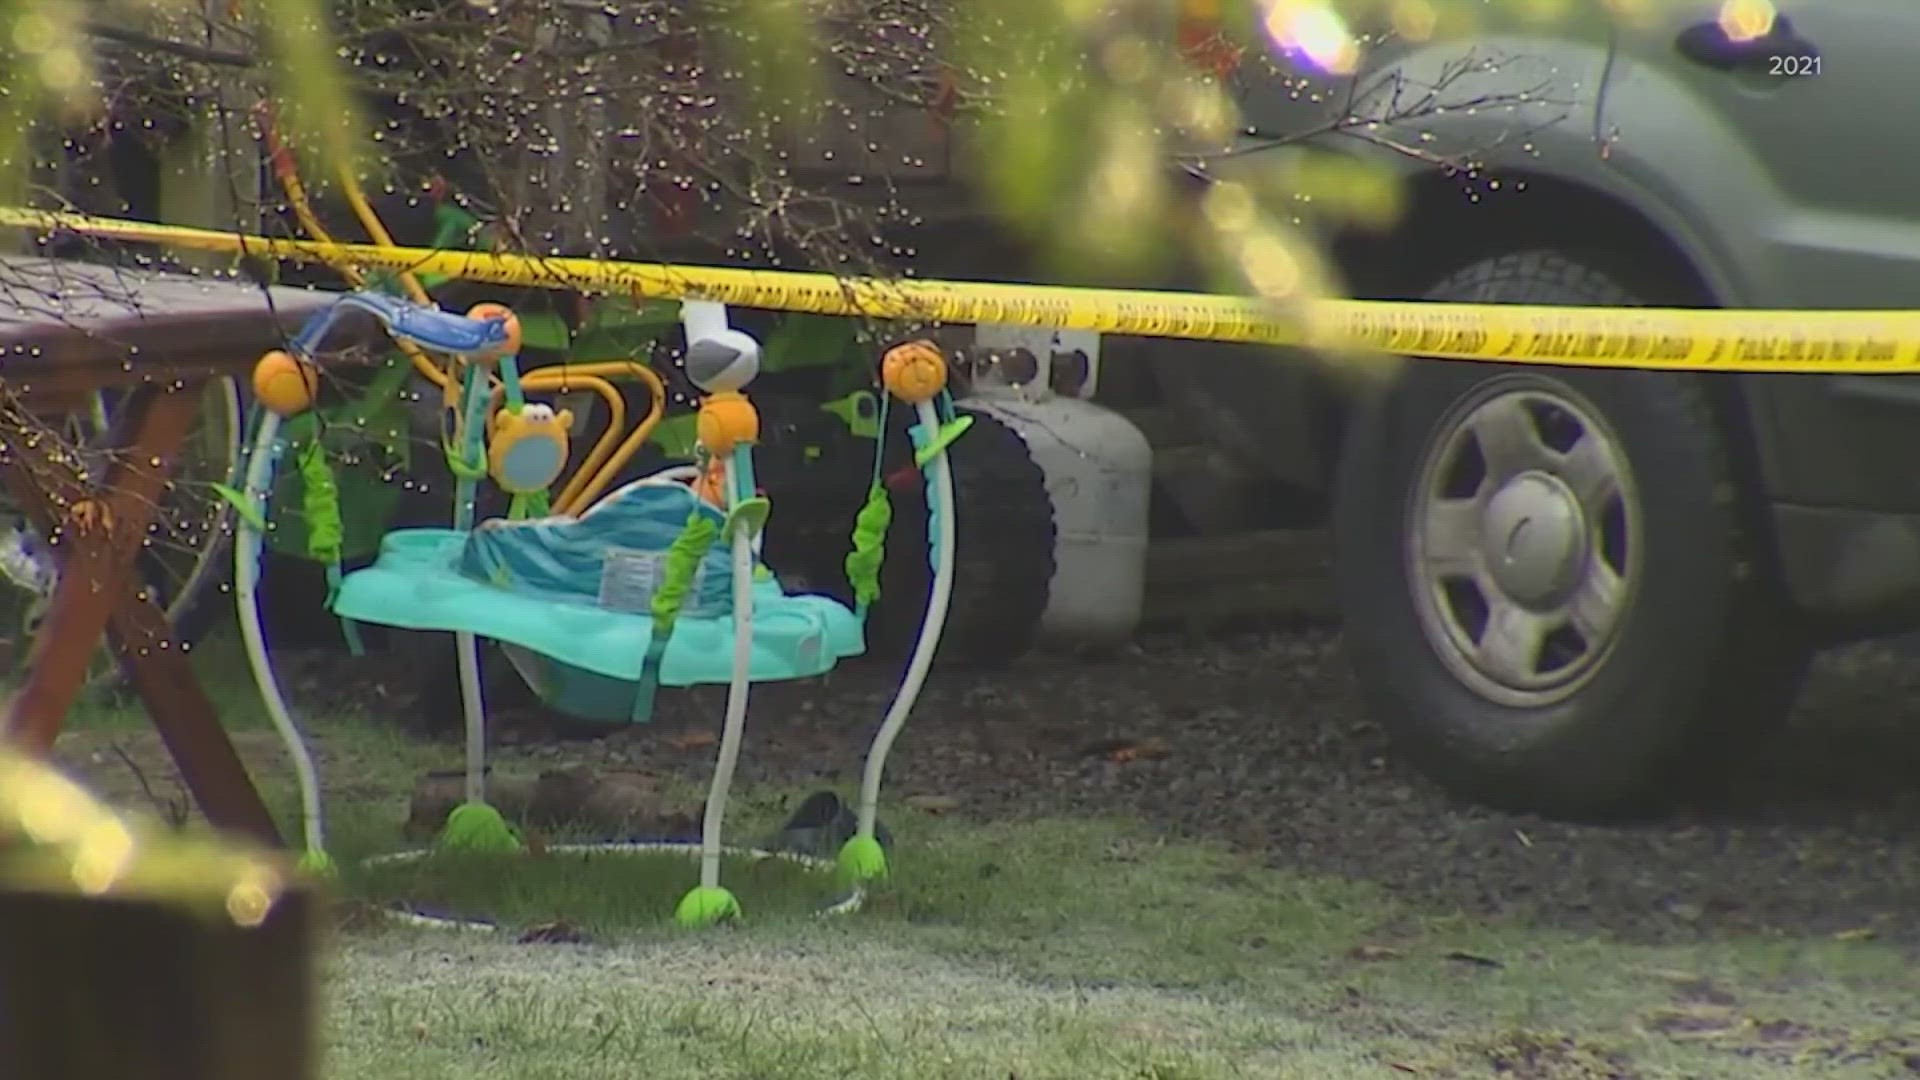 Both of the 1-year-old's parents were nearby when the gun went off, court documents say.